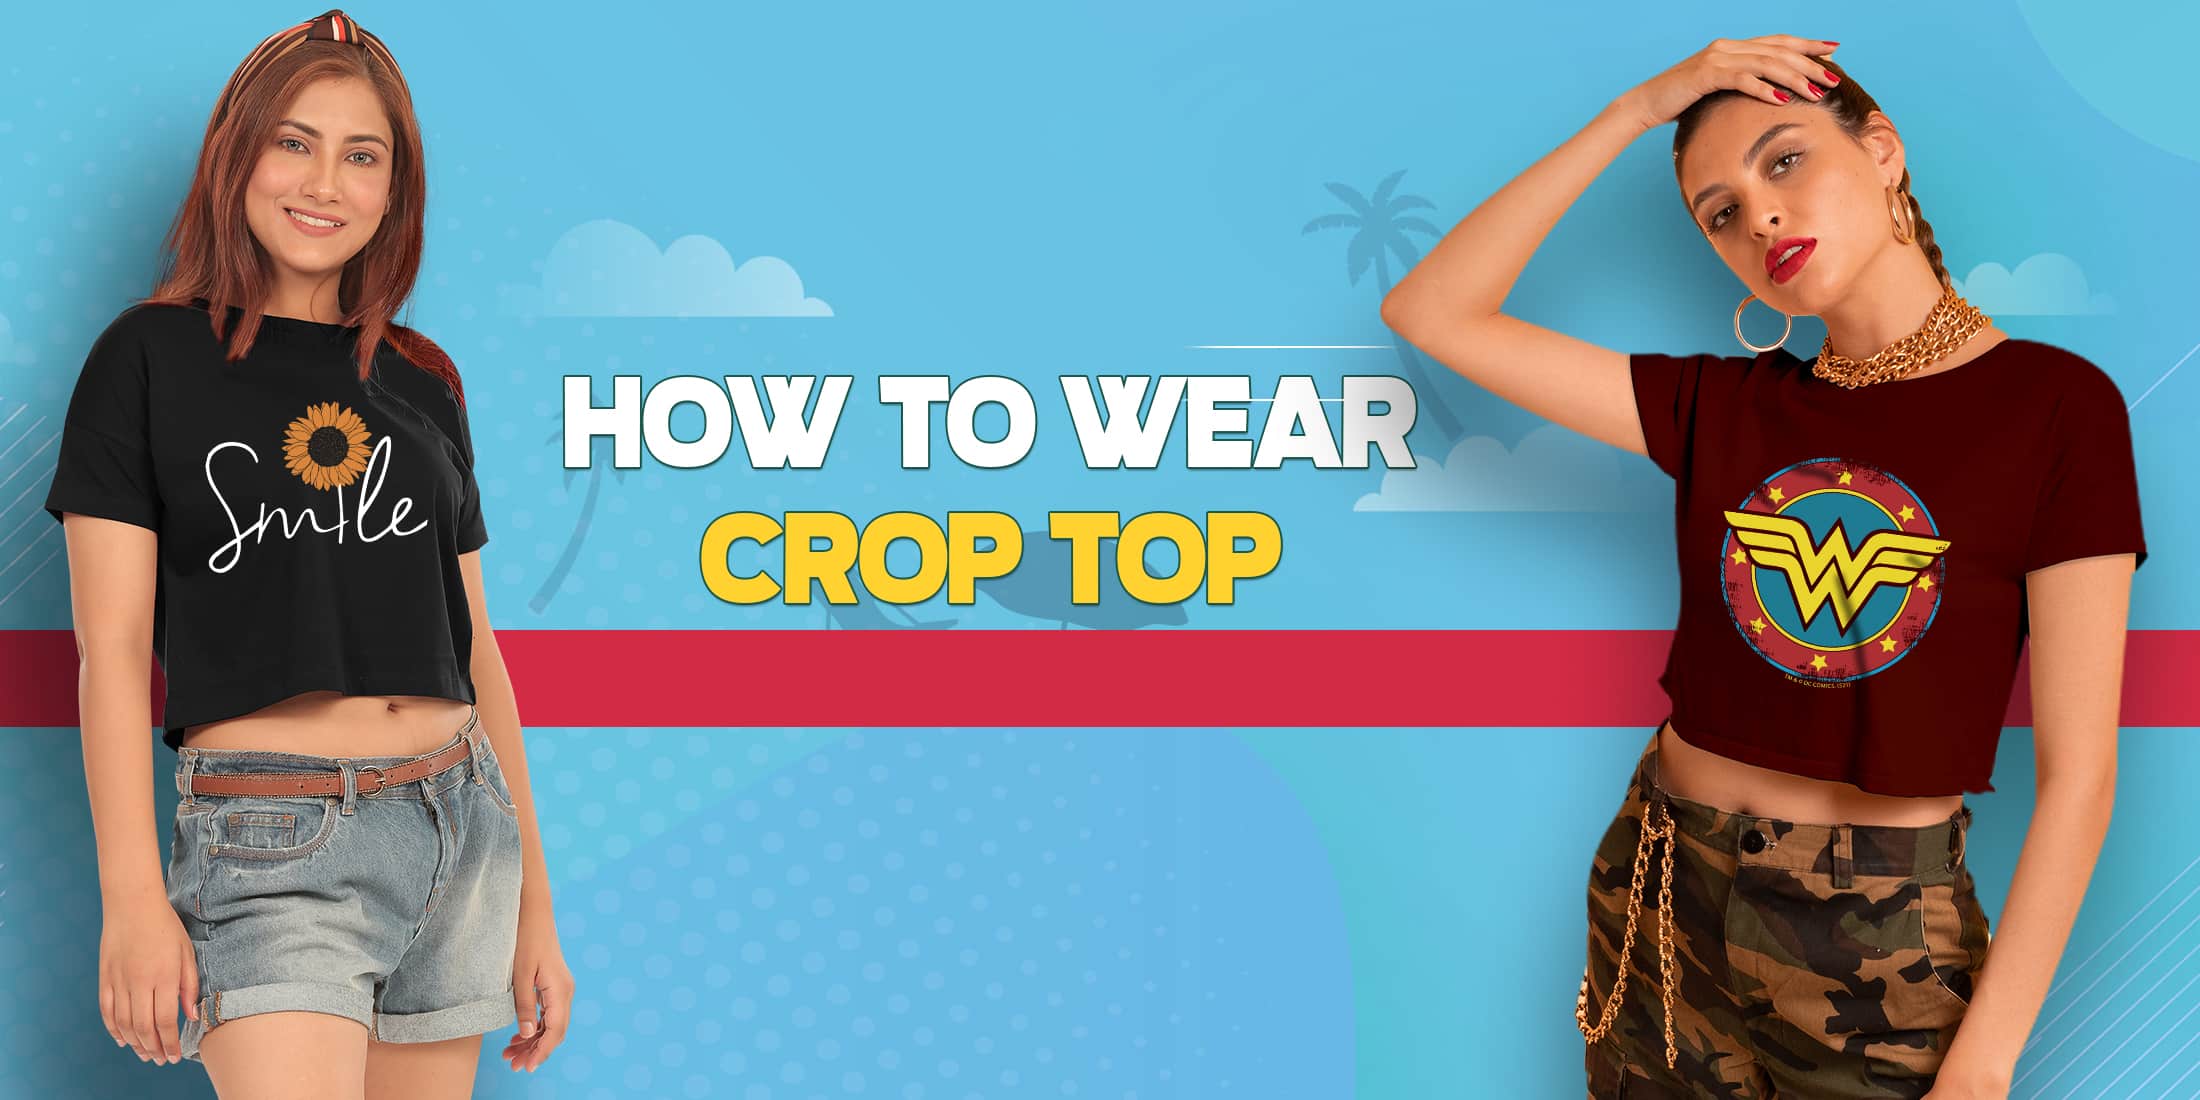 How to Wear Crop Top - 6 Ways to Wear Crop Top for Every Body Type